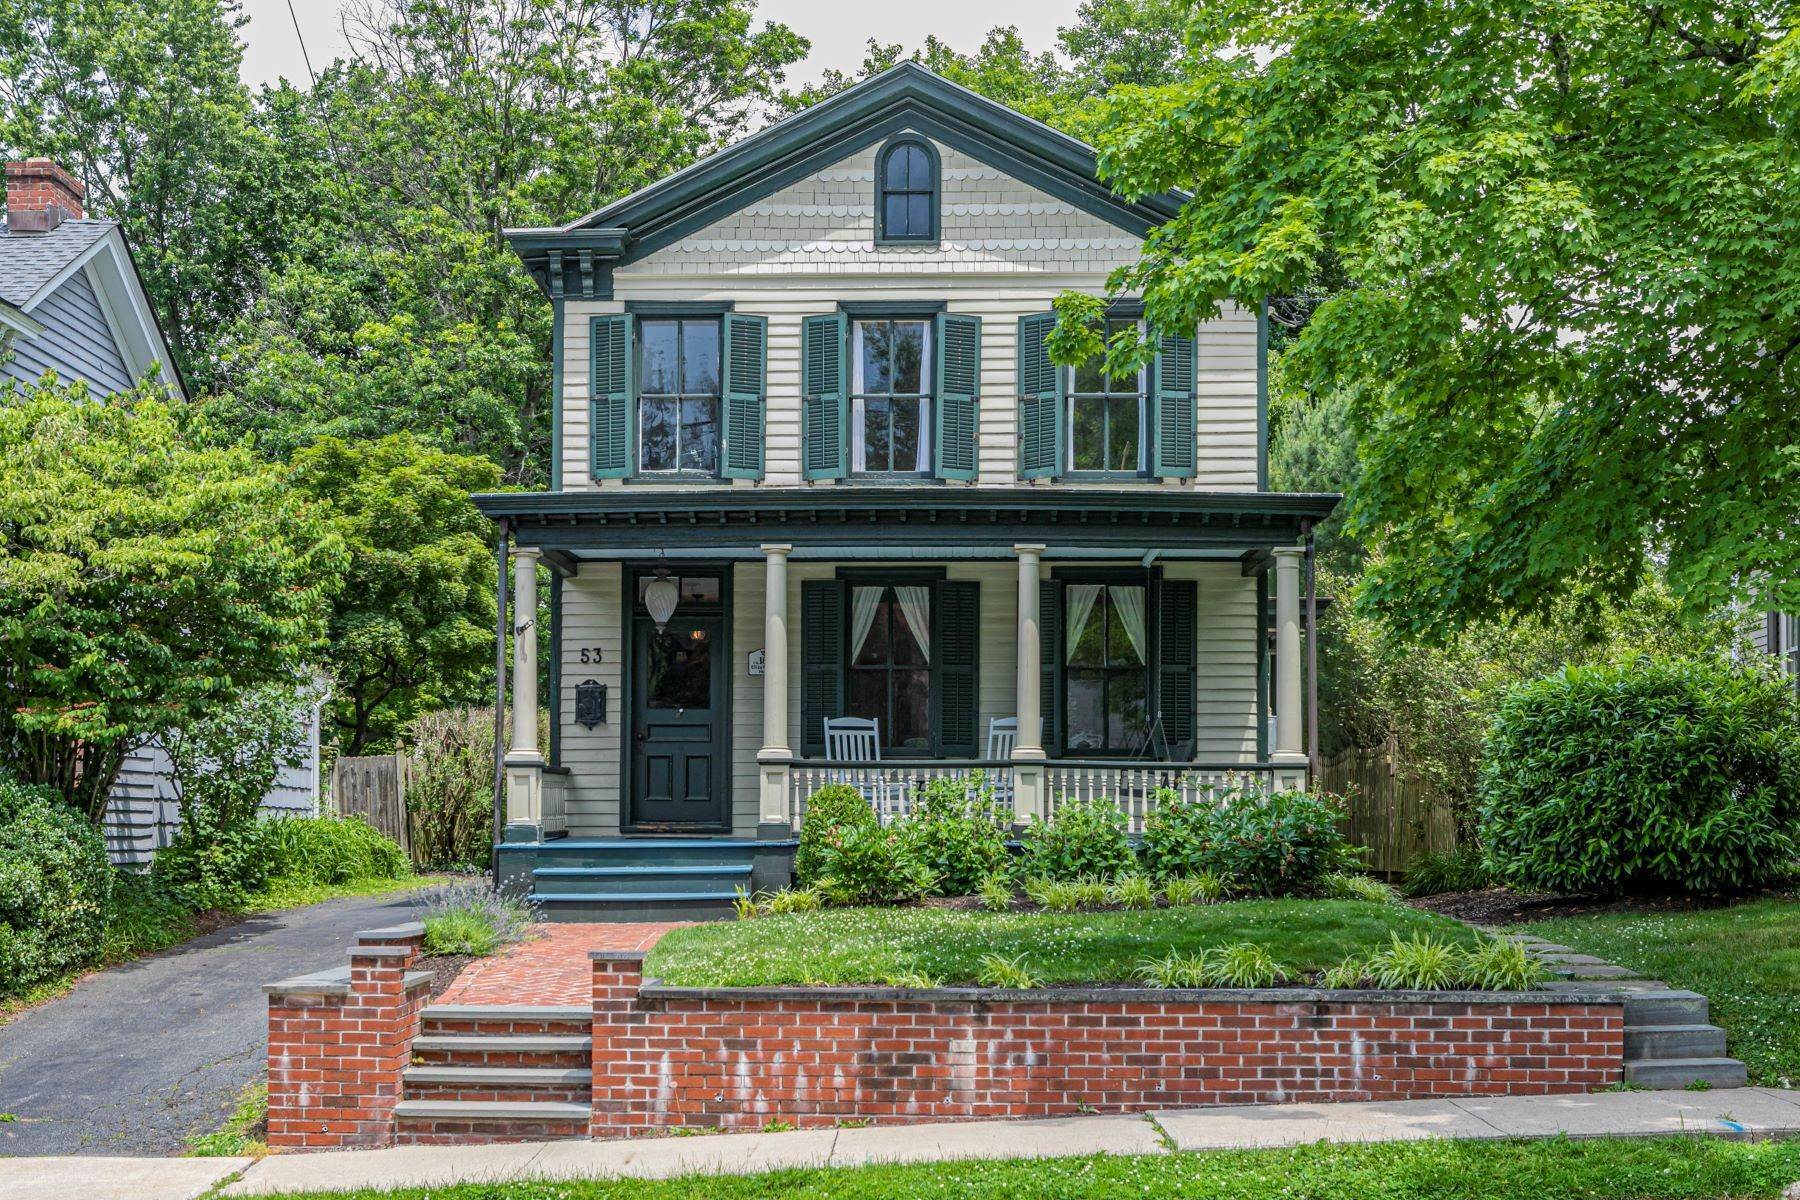 Property للـ Sale في A Total Reinvention Of This Historic Home 53 North Main Street, Pennington, New Jersey 08534 United States